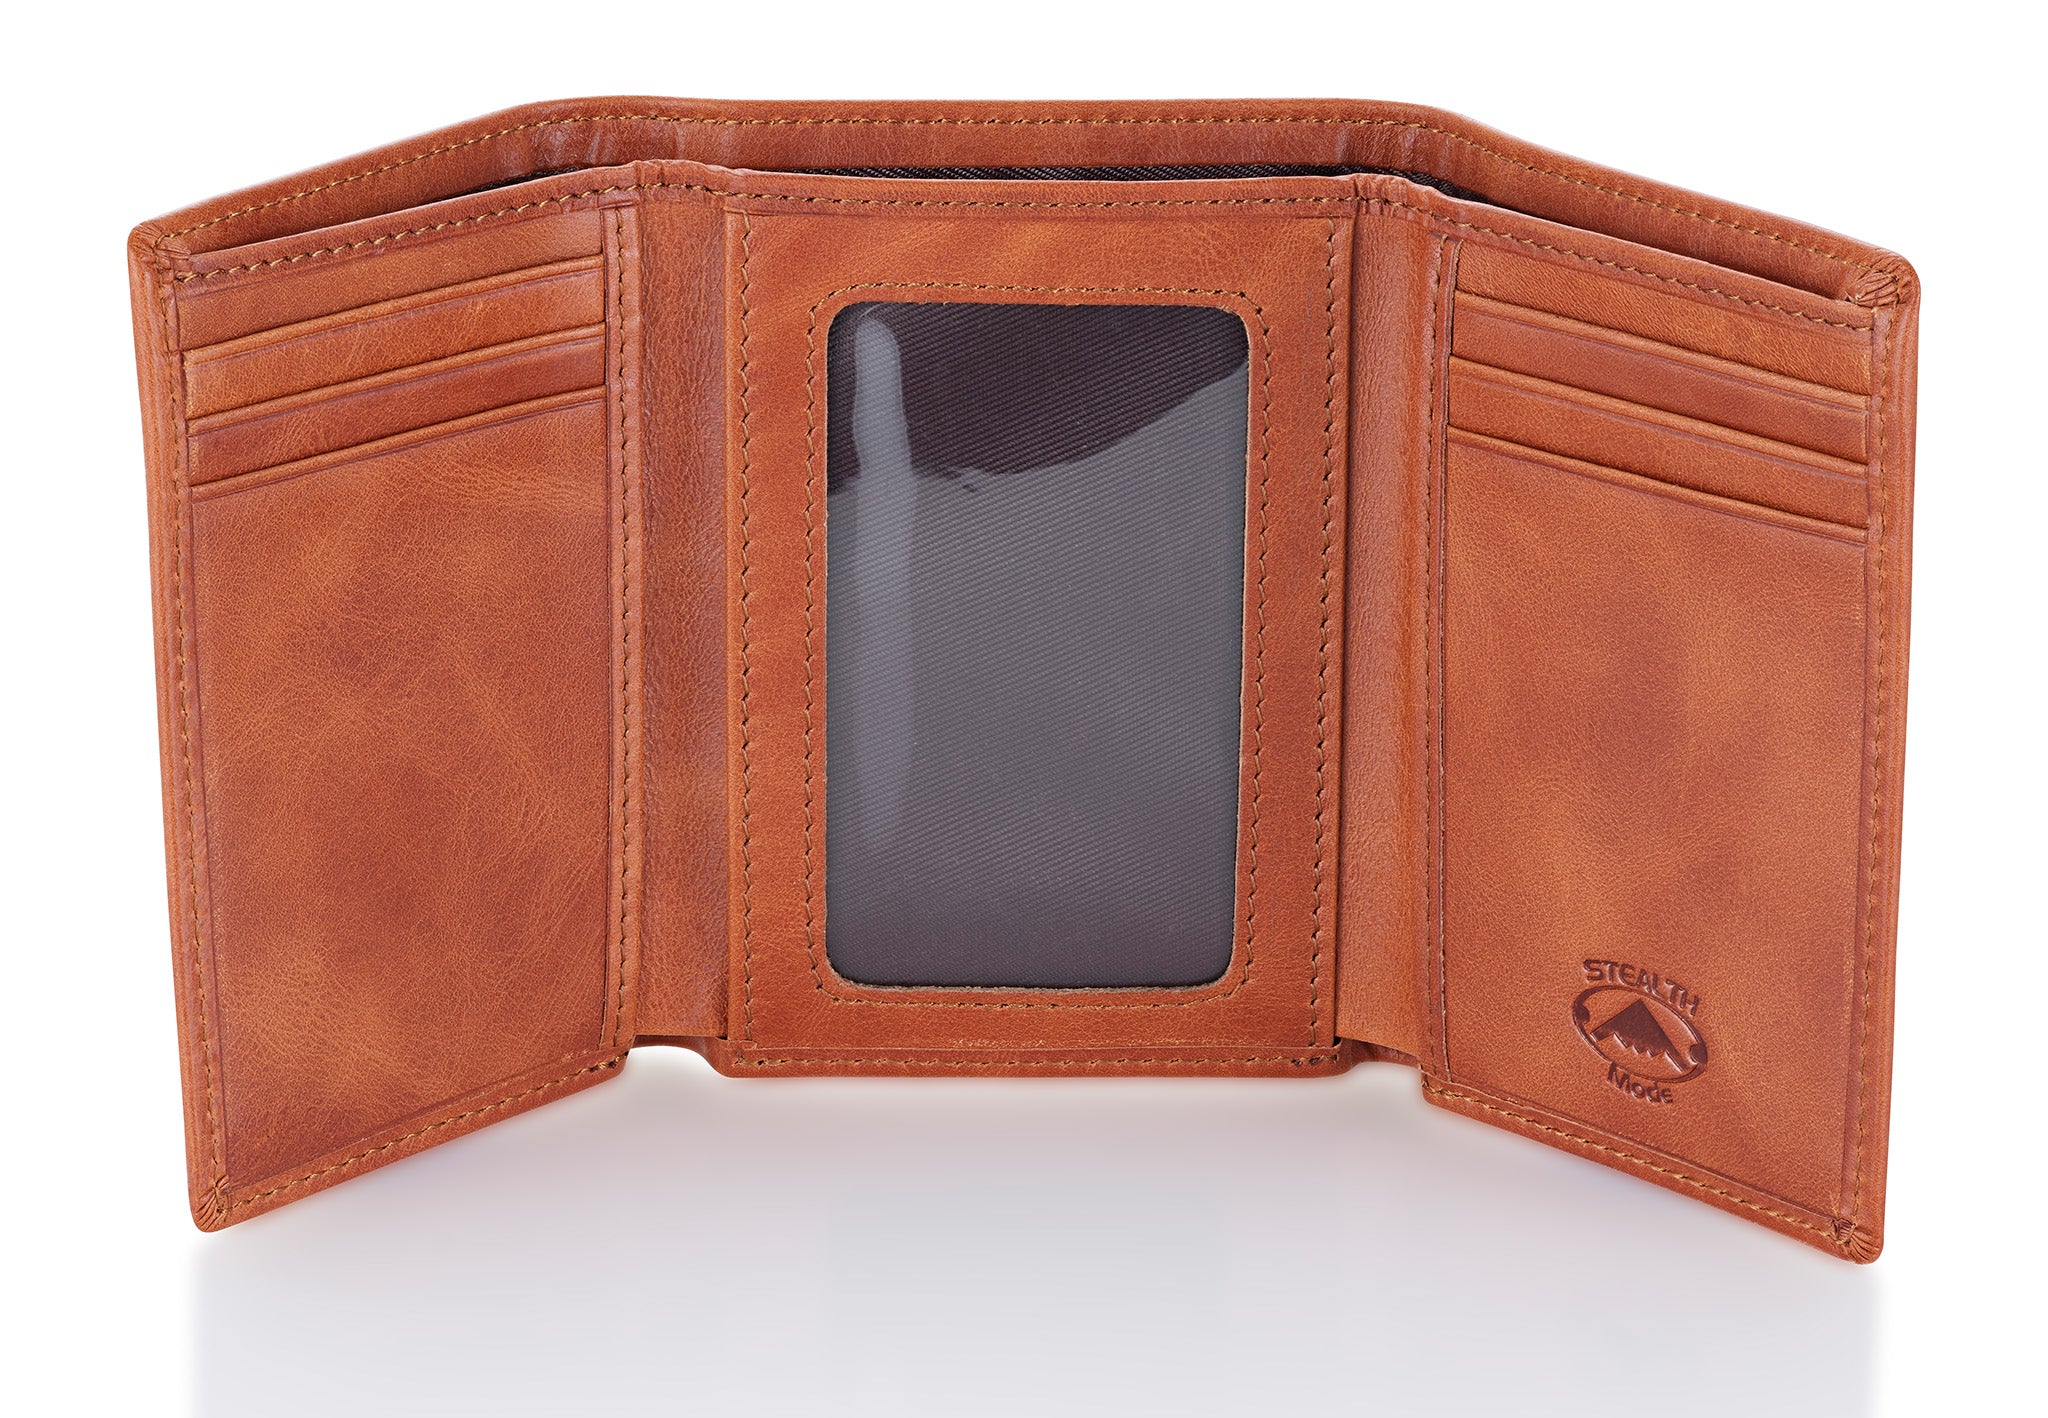 MEN'S LEATHER TRIFOLD WALLET 2361